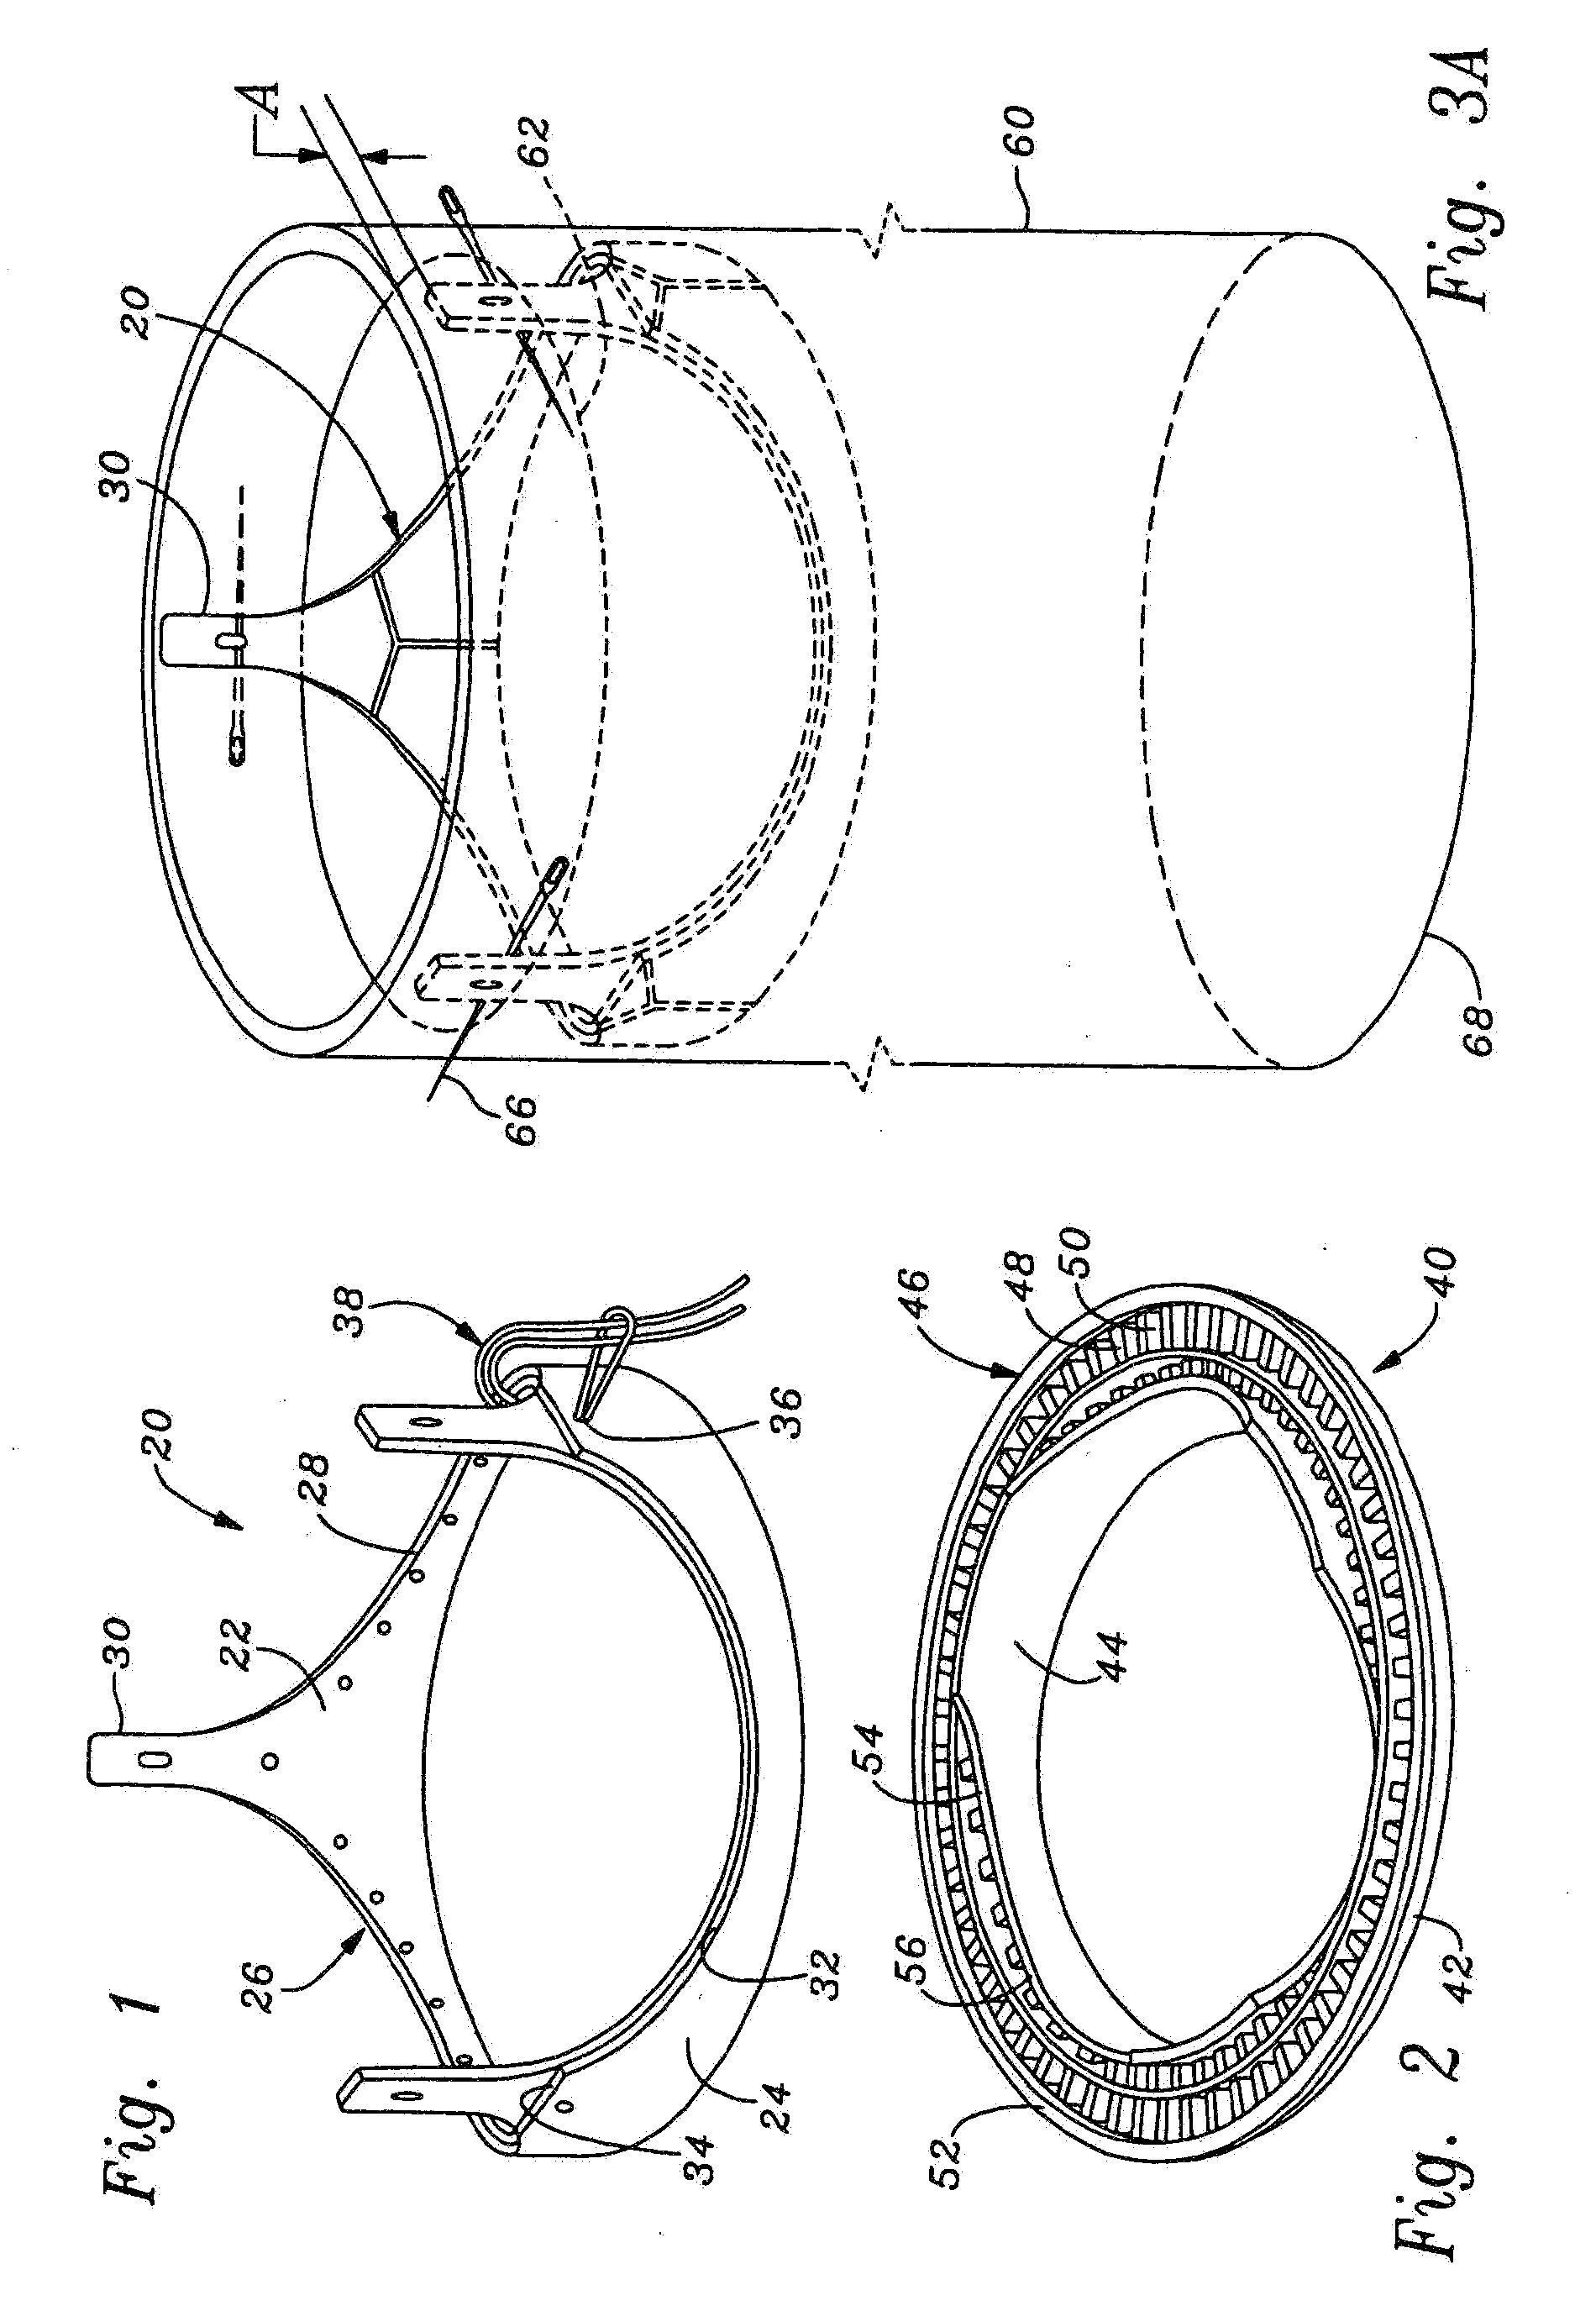 Methods of implant of a heart valve with a convertible sewing ring